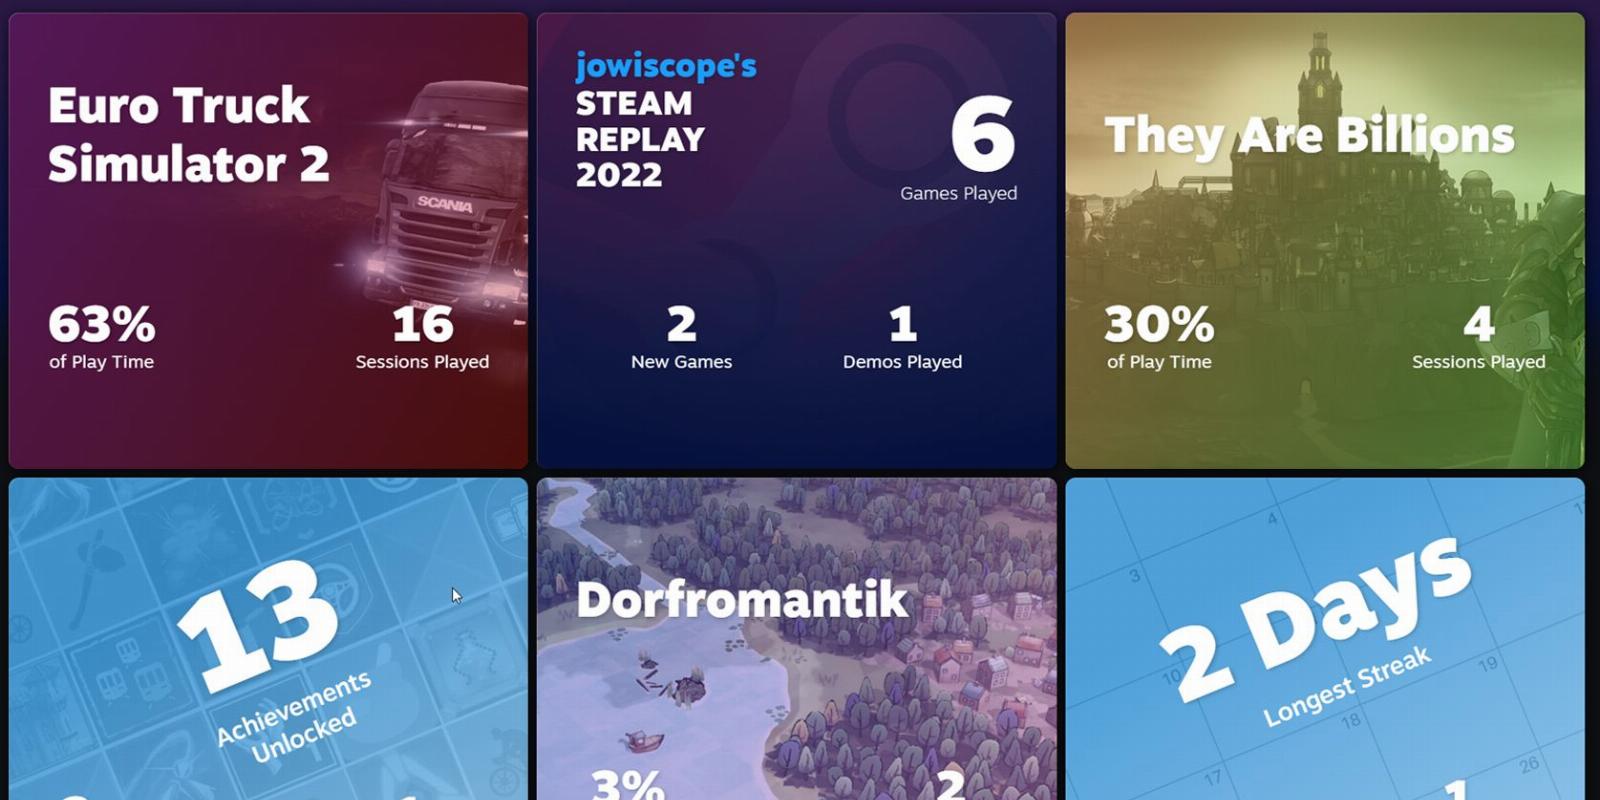 How to See Your Steam Replay 2022 and Find Out What Games You Played